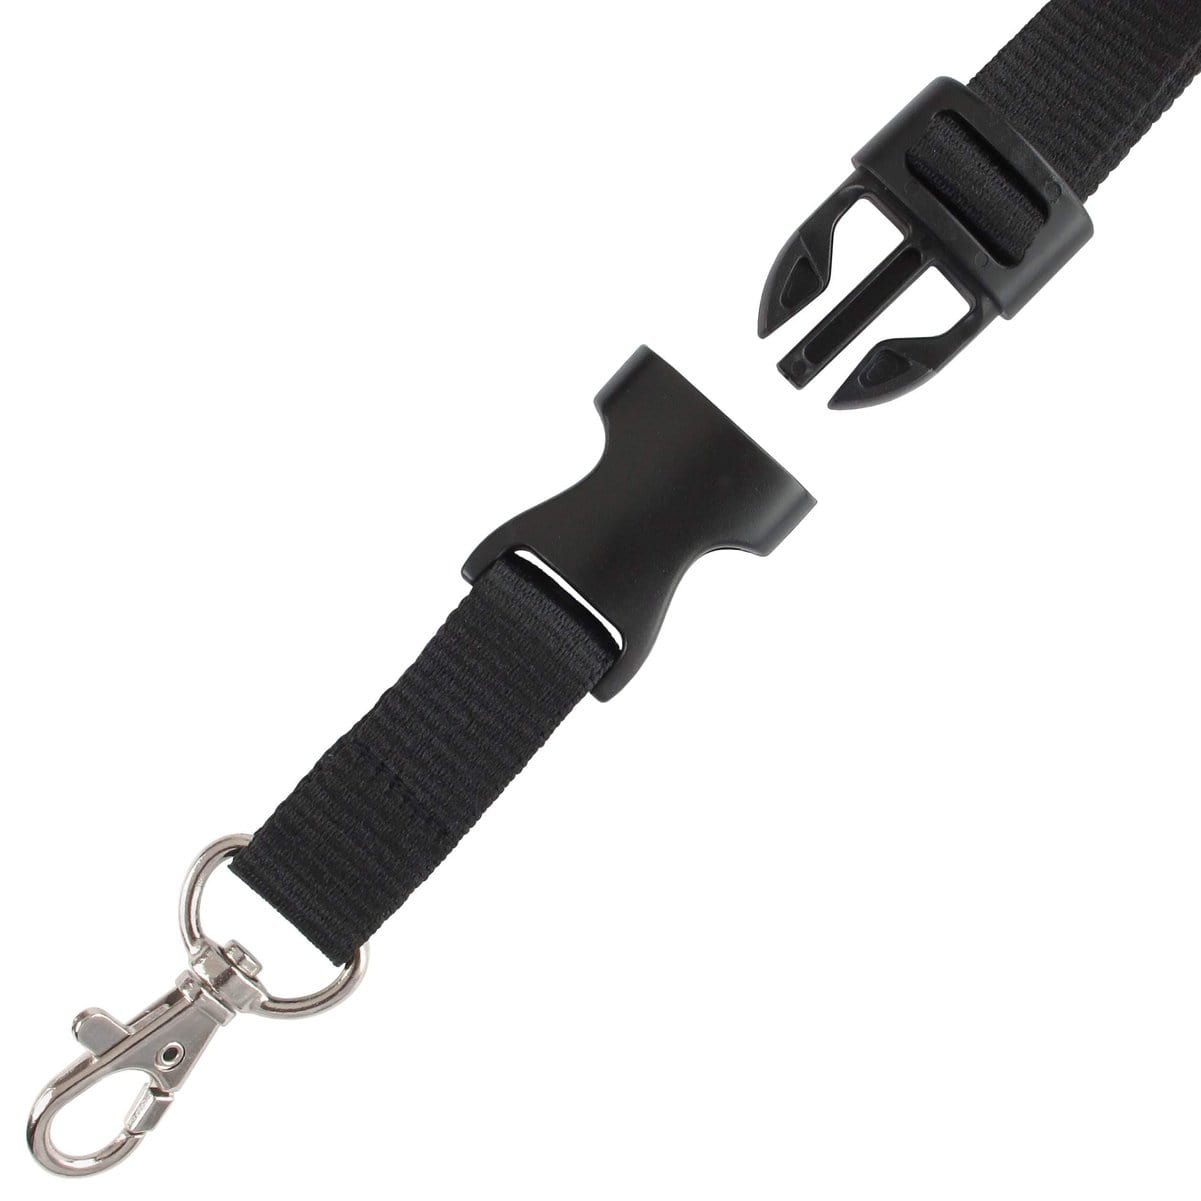 Wrist and side lanyard with breakaway clip - The Defenders